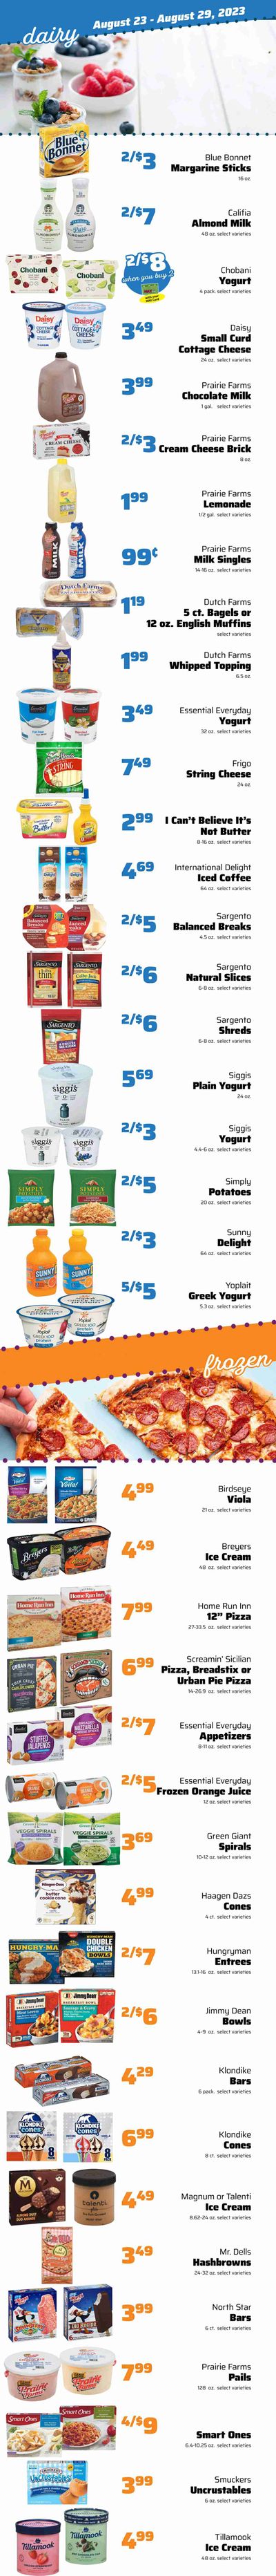 County Market (IL, IN, MO) Weekly Ad Flyer Specials August 23 to August 29, 2023